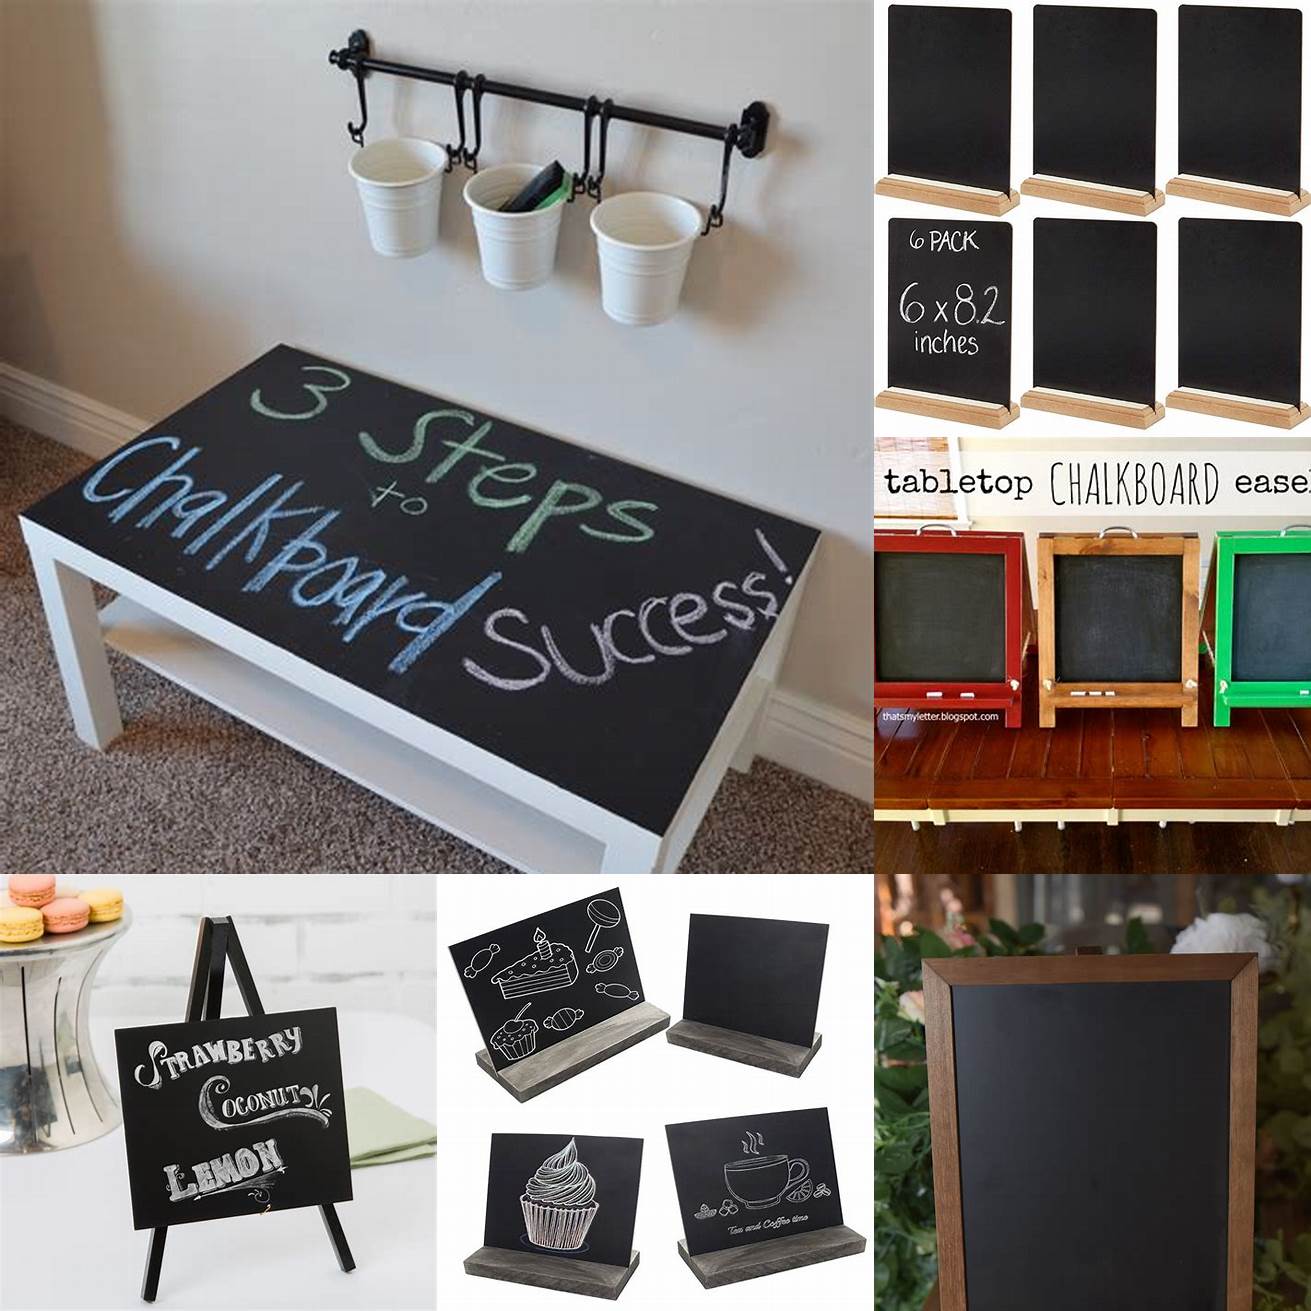 2 Tabletop A tabletop chalkboard is smaller in size and can be placed on a countertop or table This is great for smaller kitchens or for those who dont have wall space for a larger board